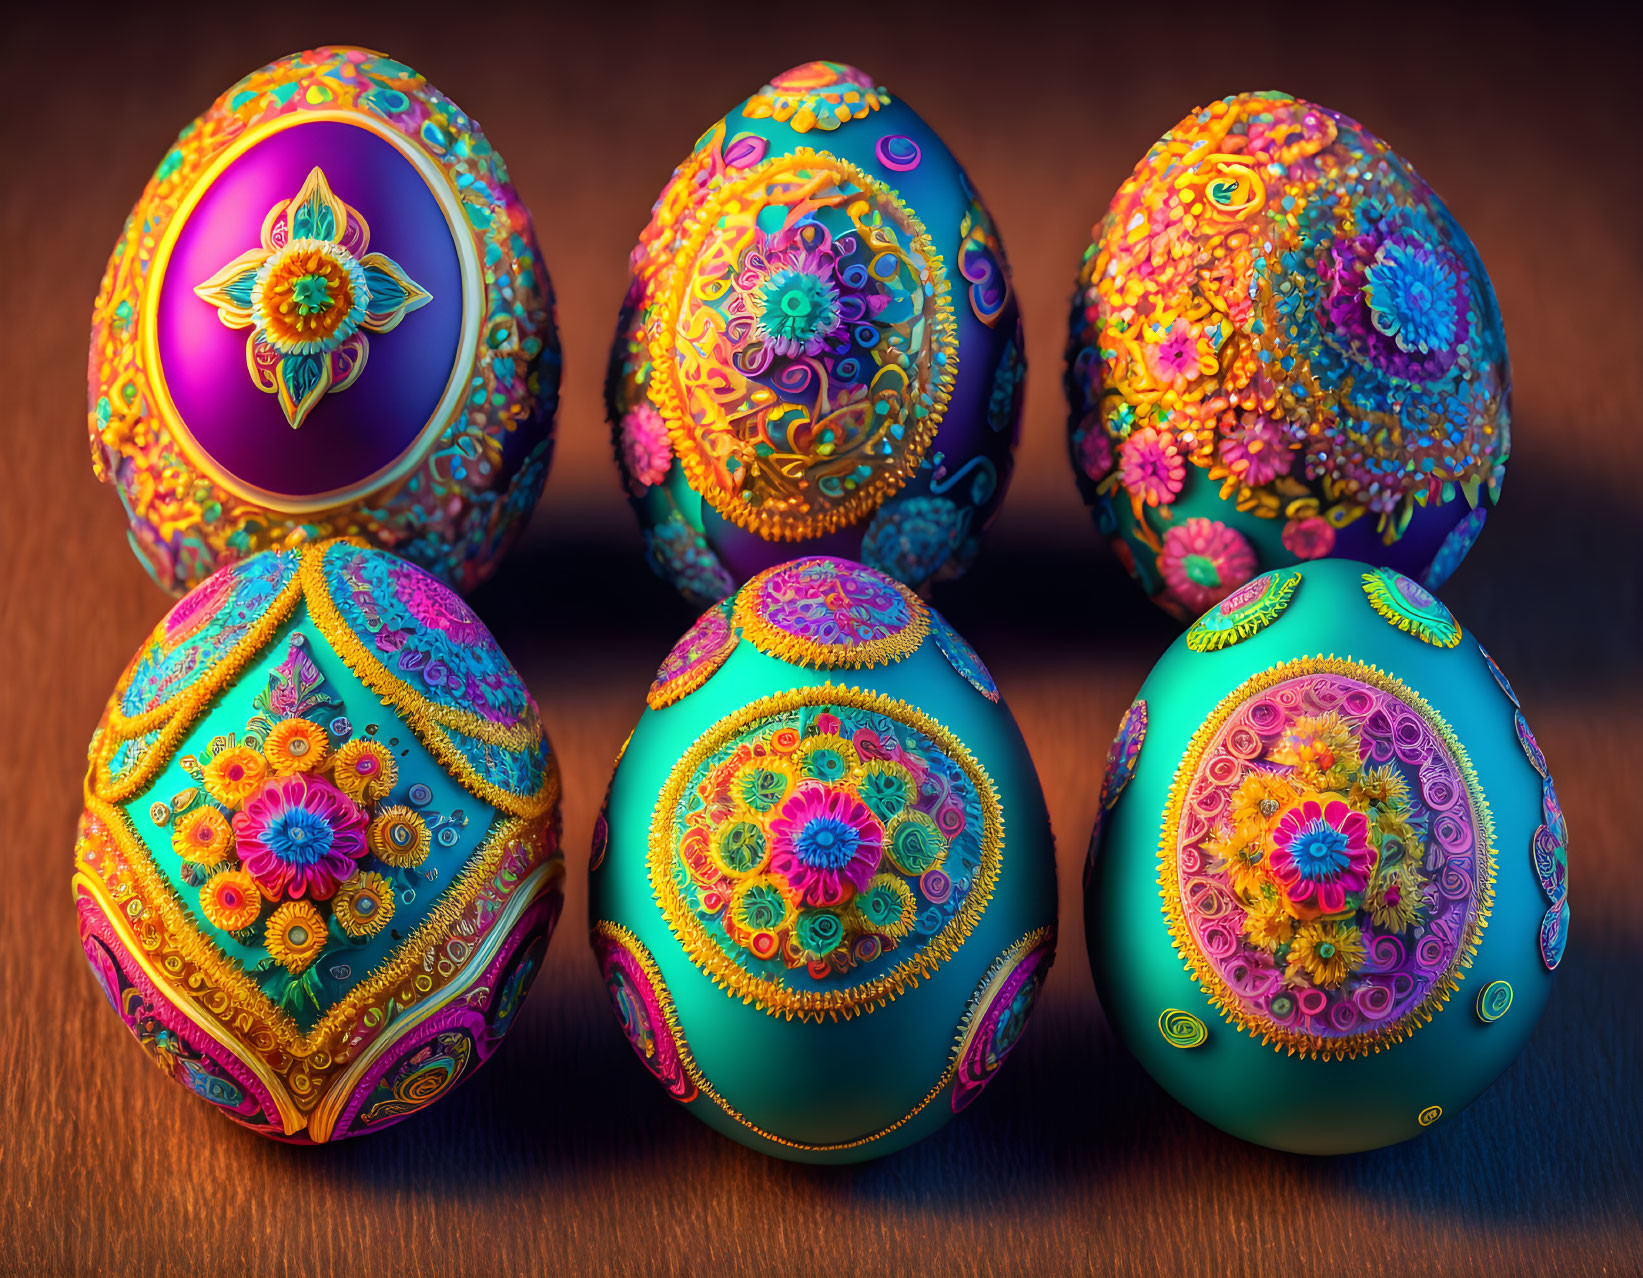 Six intricately patterned and colorful decorated eggs on wooden surface